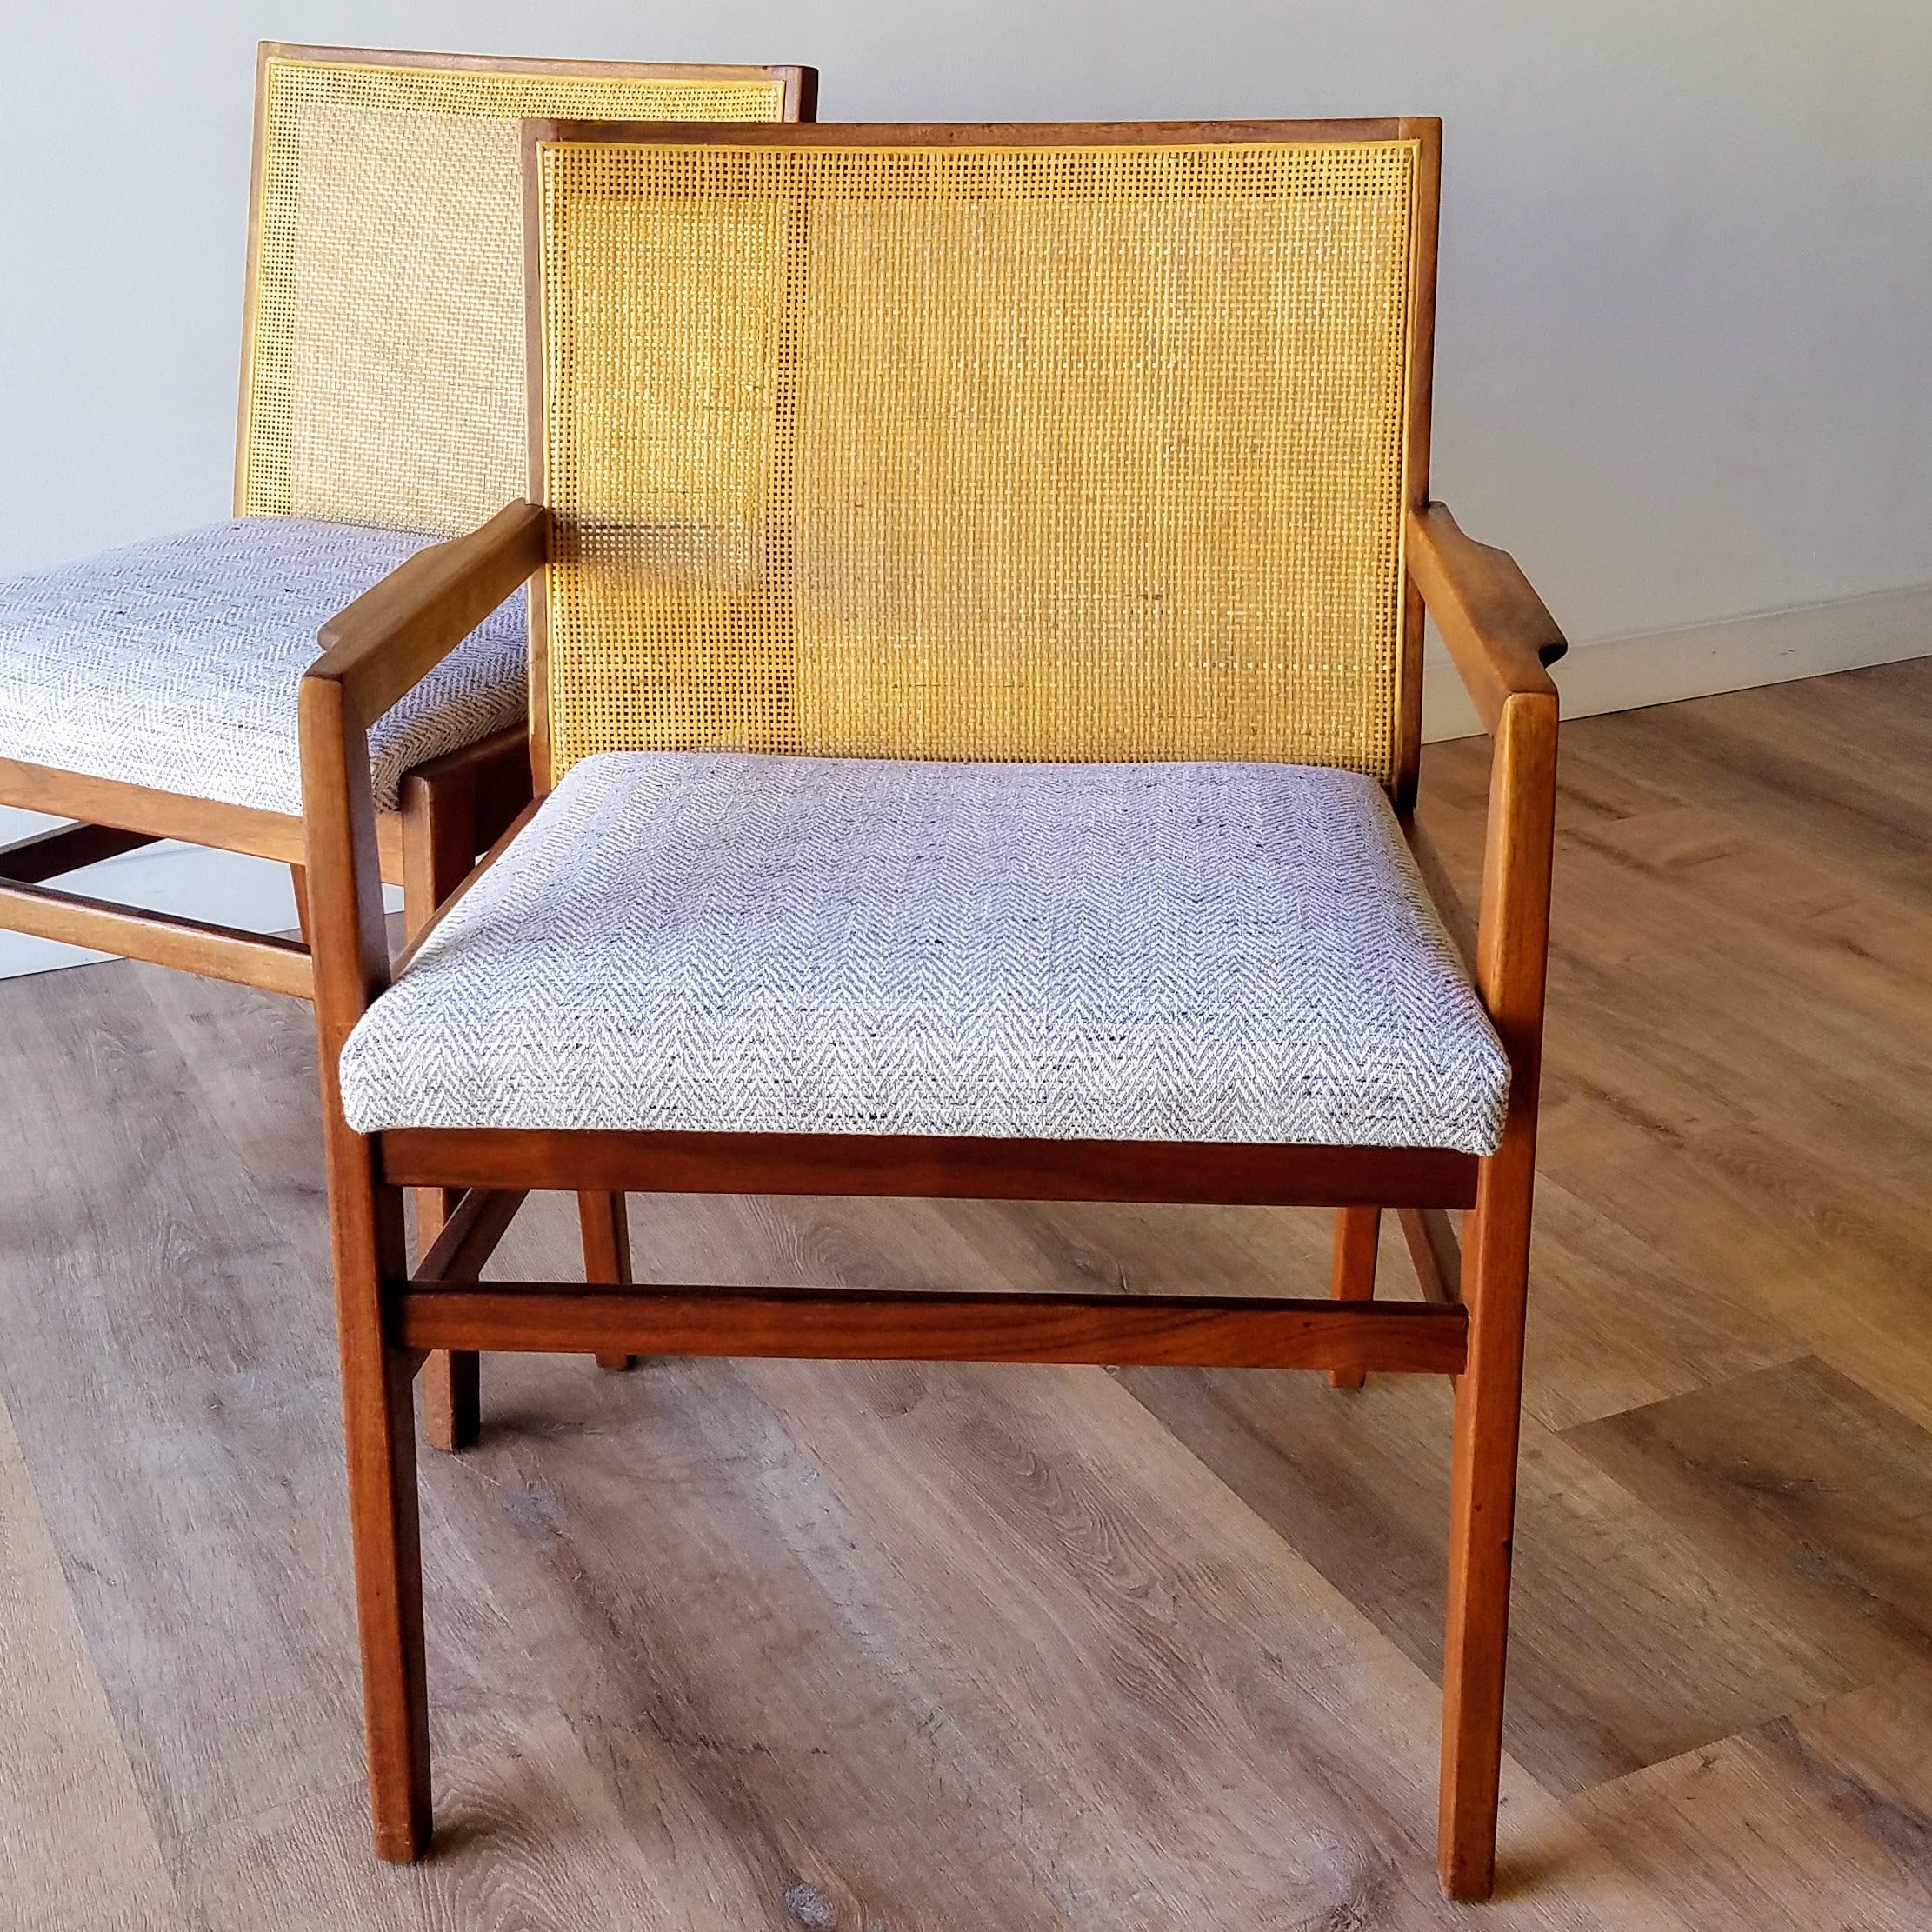 Seat Weaving Shop Walnut Dining Chairs